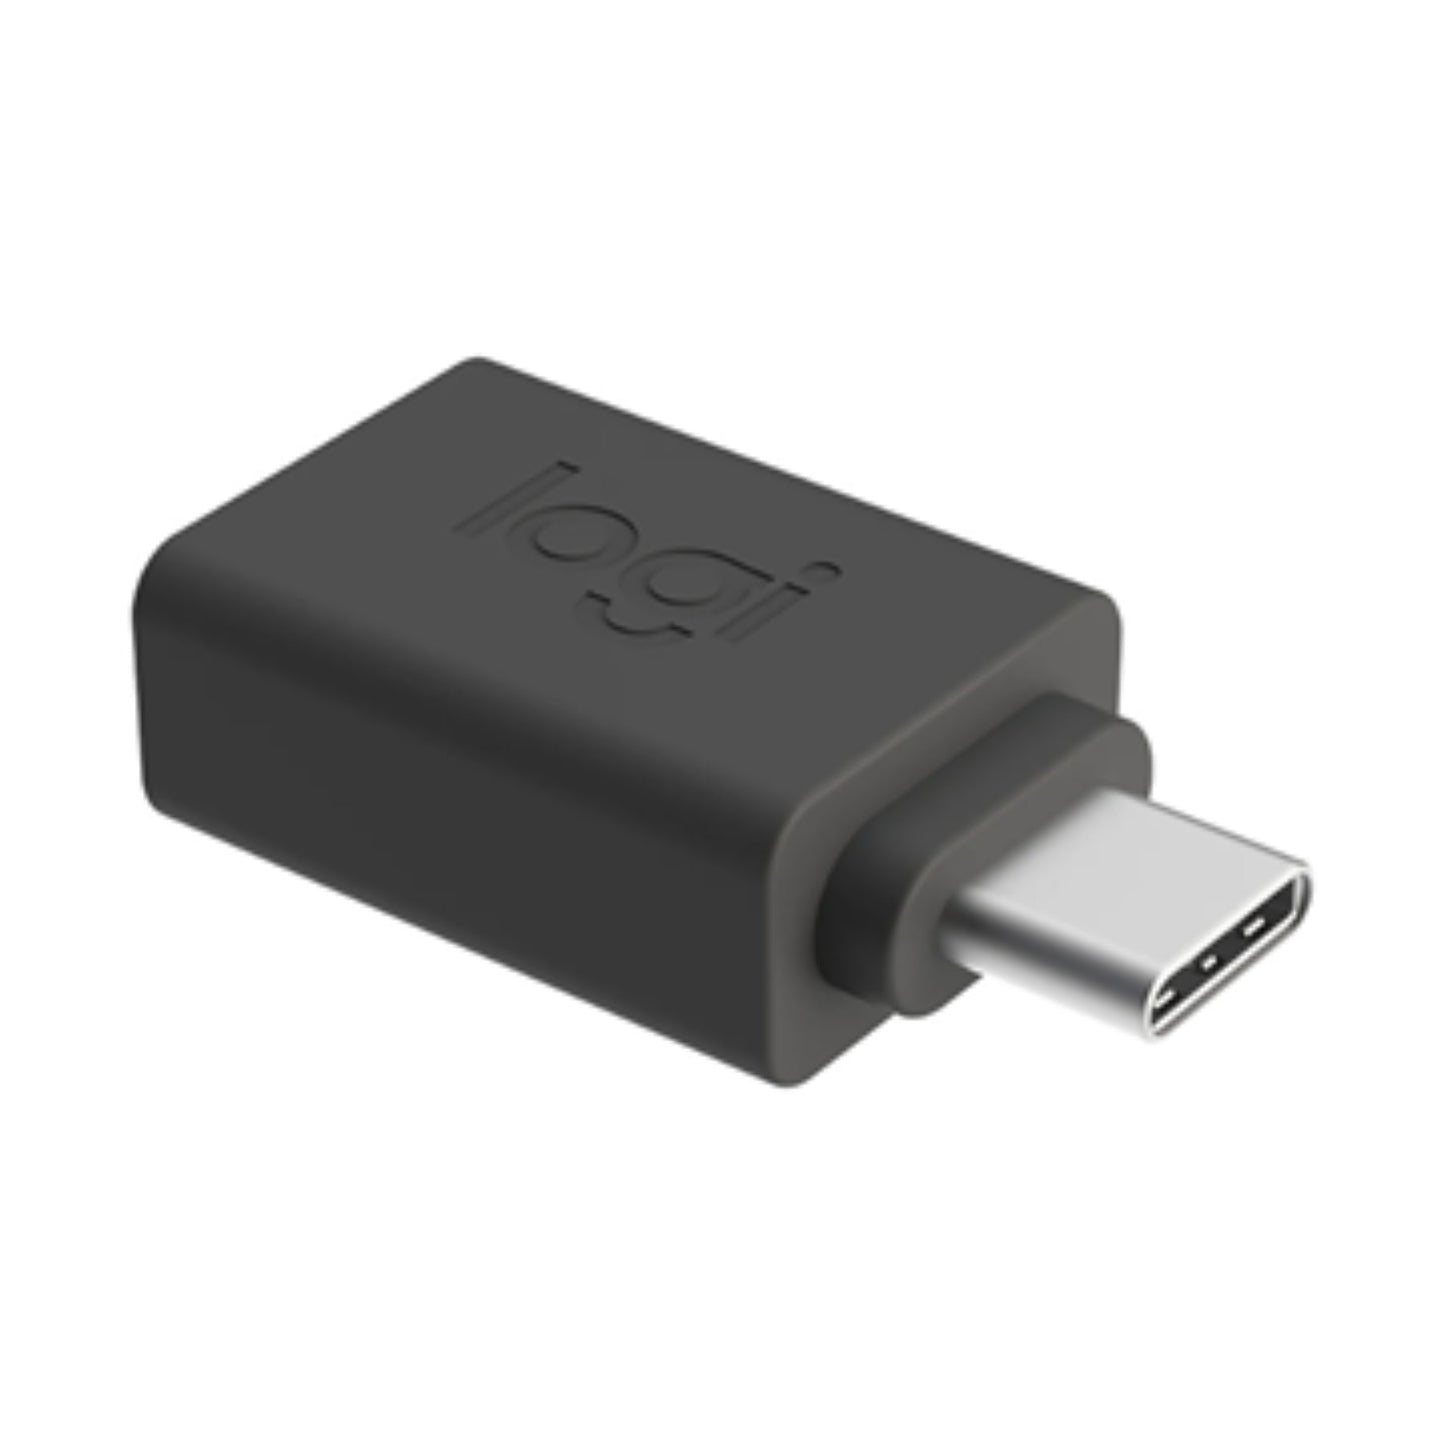 Buy Logitech USB Type-A to USB Type-C Adapter at Topic Store